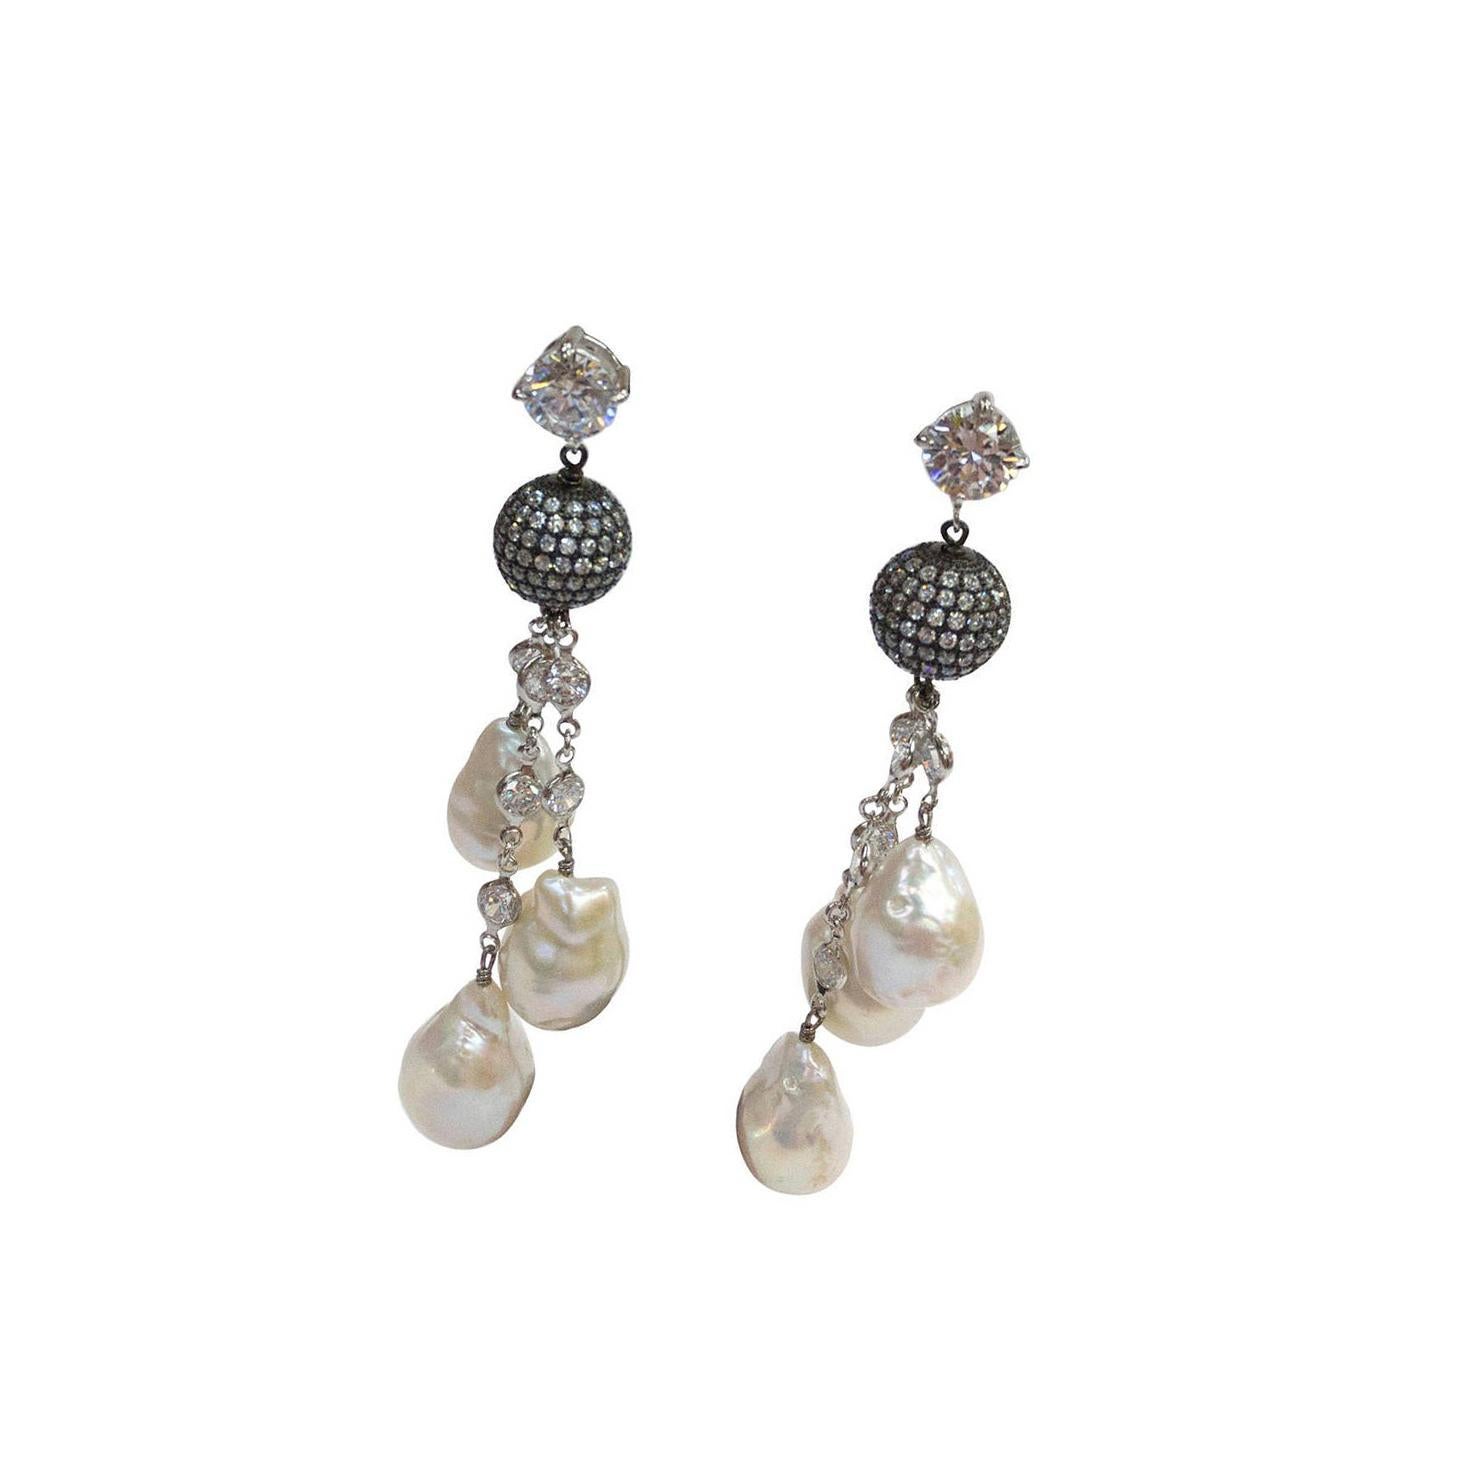 CZ Sterling Baroque Pearl Drops Triple Strand Tassel Silver Dangle Earrings
Fabulous Sterling Silver Drop Earrings with glittering CZs, suspending cascading multi strands of large Cultured Freshwater Baroque Pearls on Black Rhodium CZ chains from a